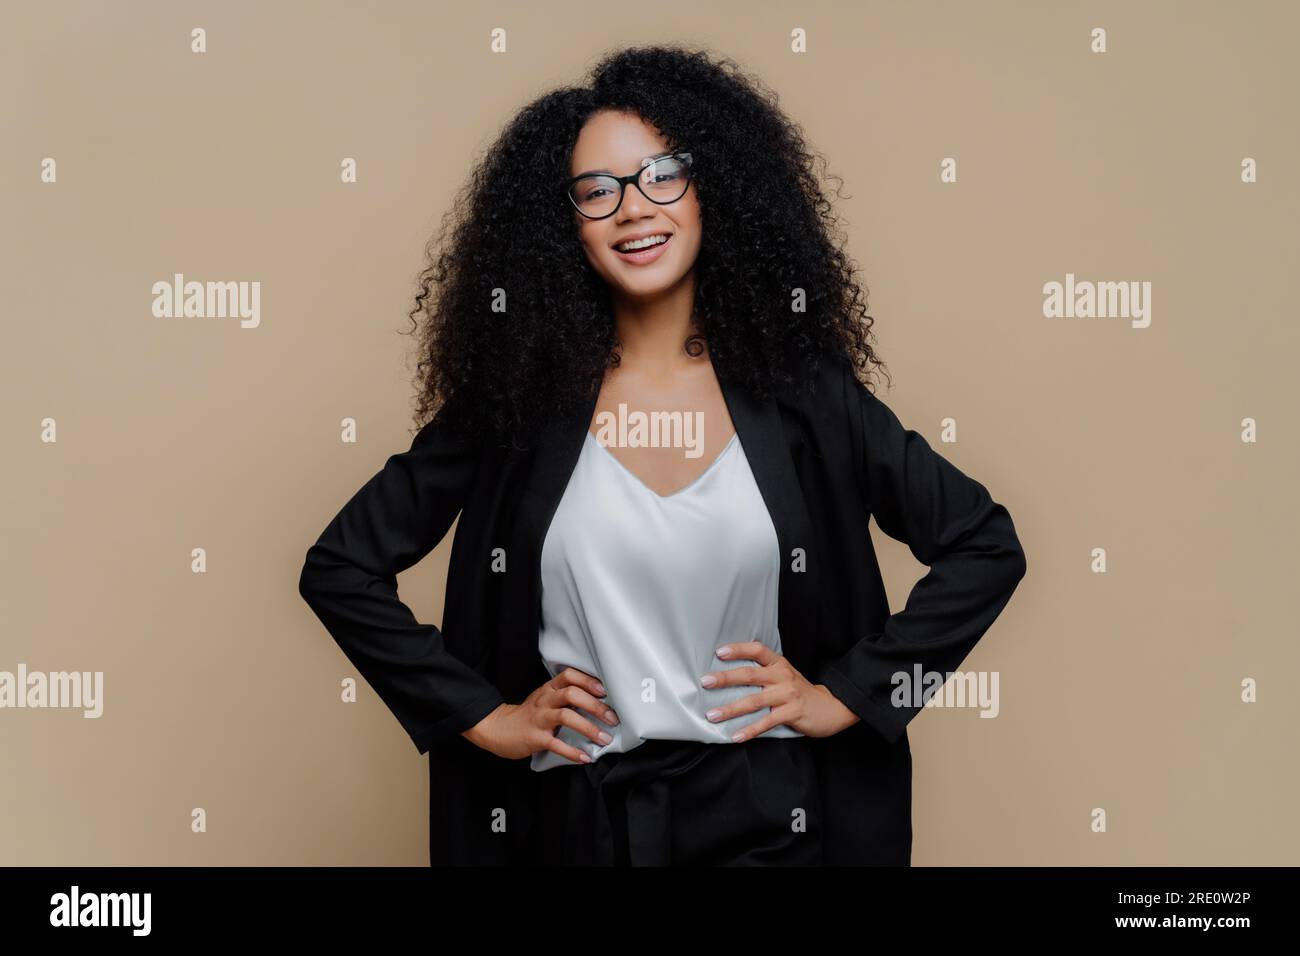 Joyful Afro woman, elegant black clothes, hands on hips, glasses, beaming smile. Female director, isolated on brown. Stock Photo